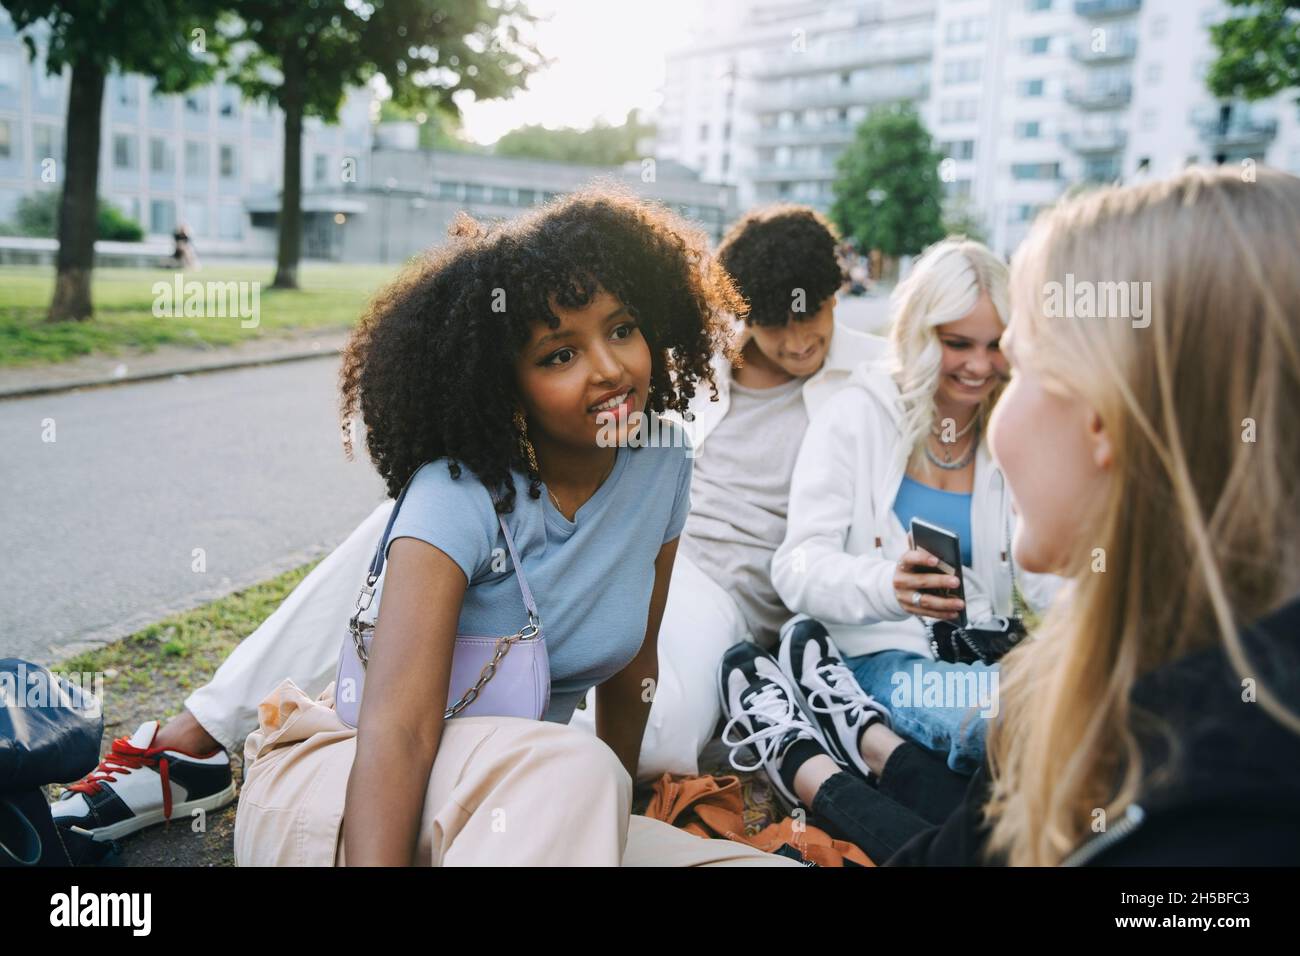 Female and male friends spending leisure time in park Stock Photo